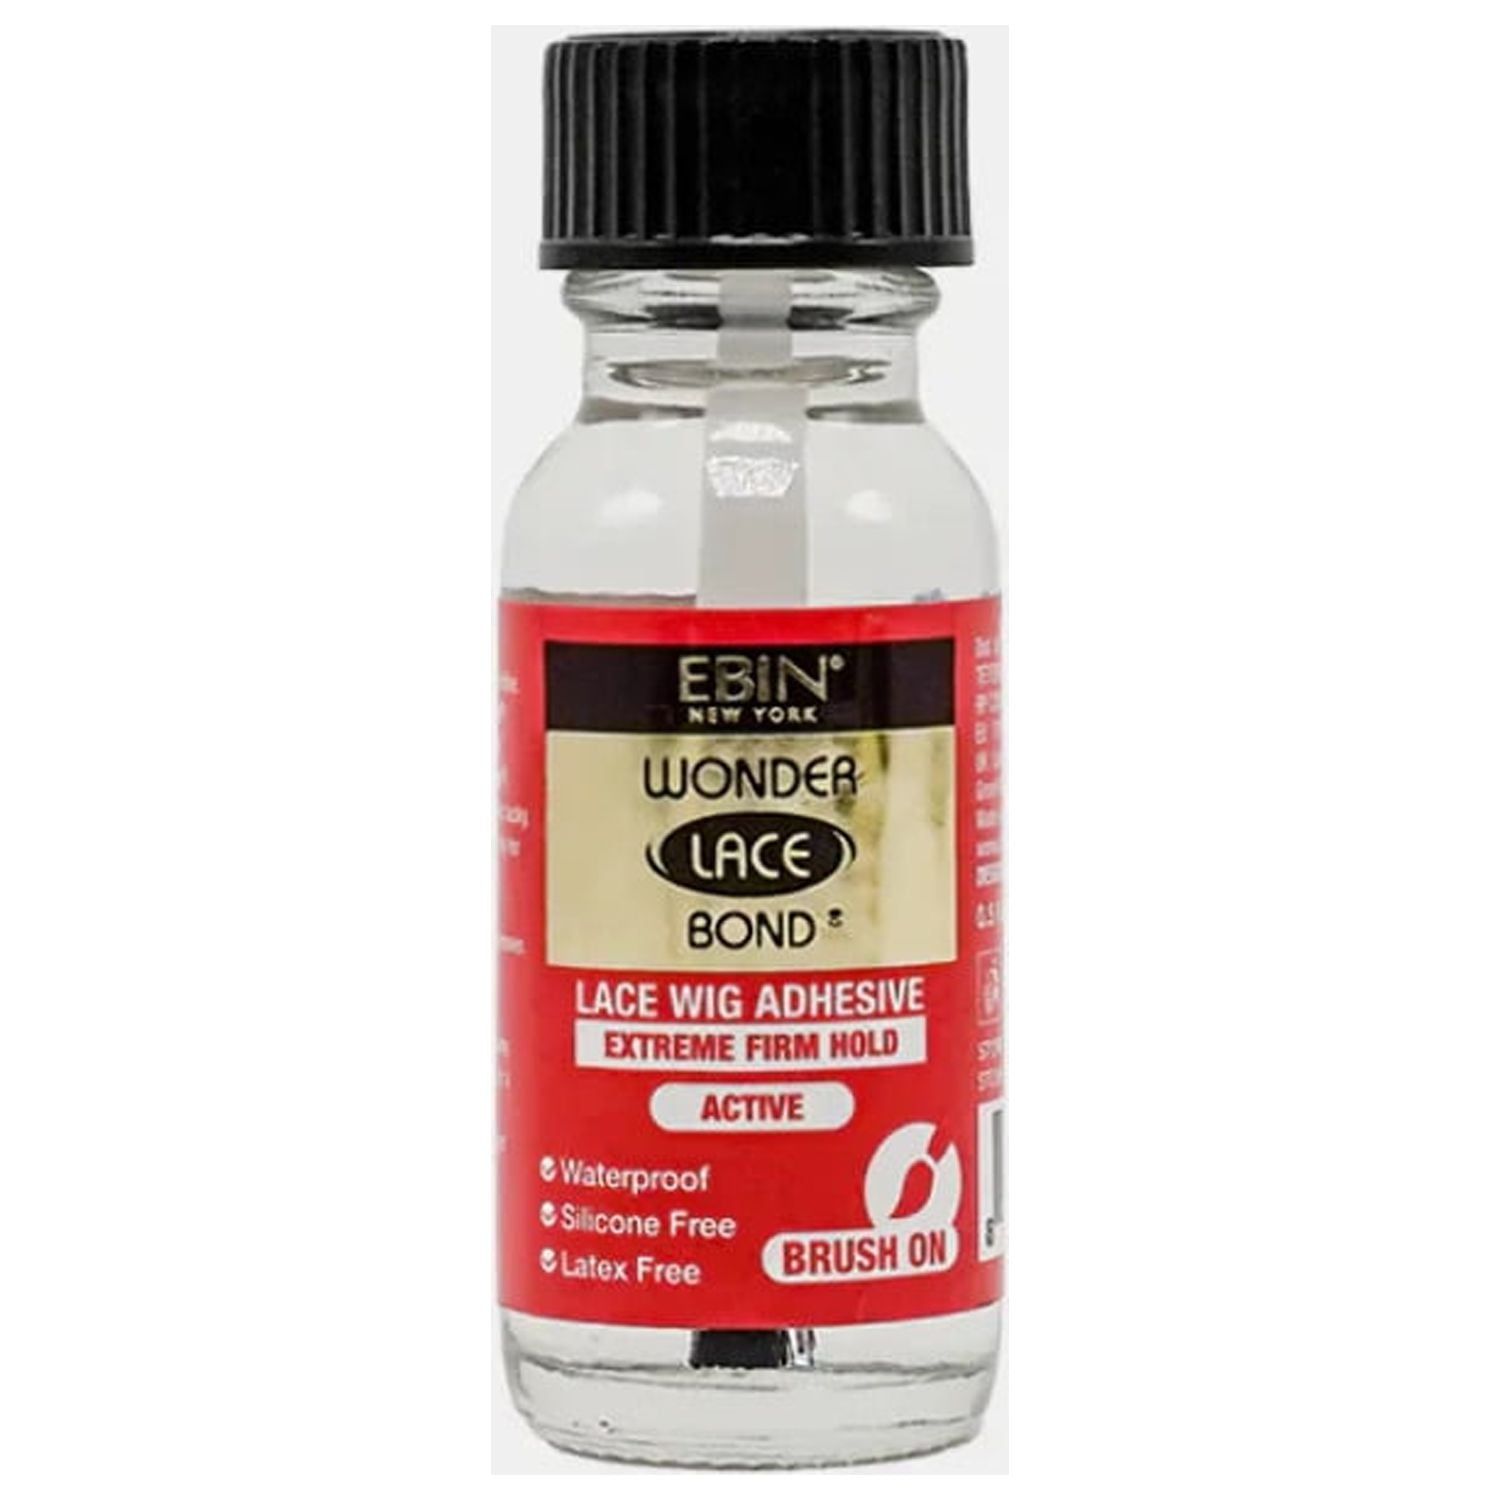 Ebin Wonder Lace Clear Bond - Extreme Firm Hold